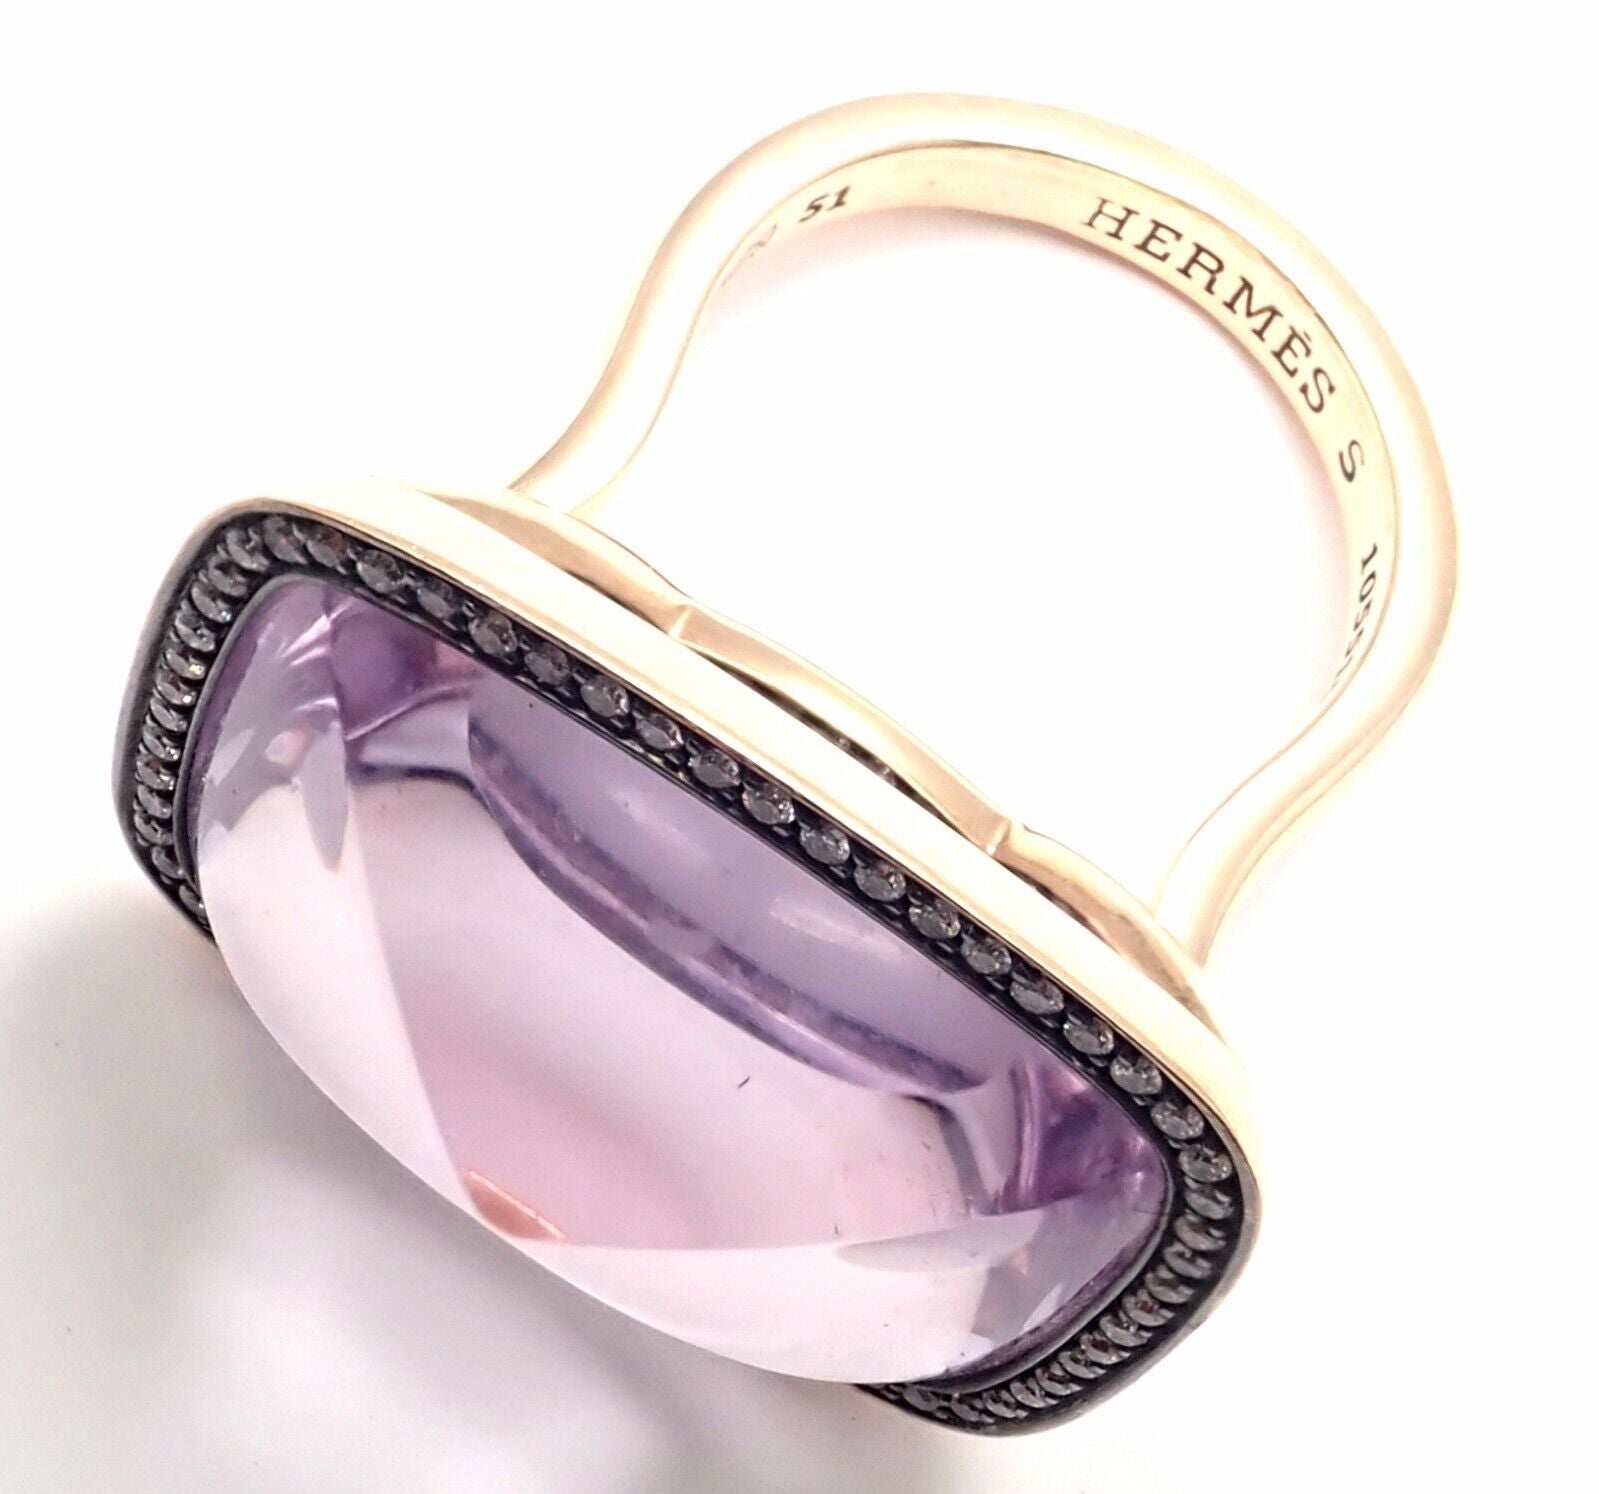 Hermes Jewelry & Watches:Fine Jewelry:Rings Rare! Authentic Hermes 18k Rose Gold Diamond Large Amethyst Ring